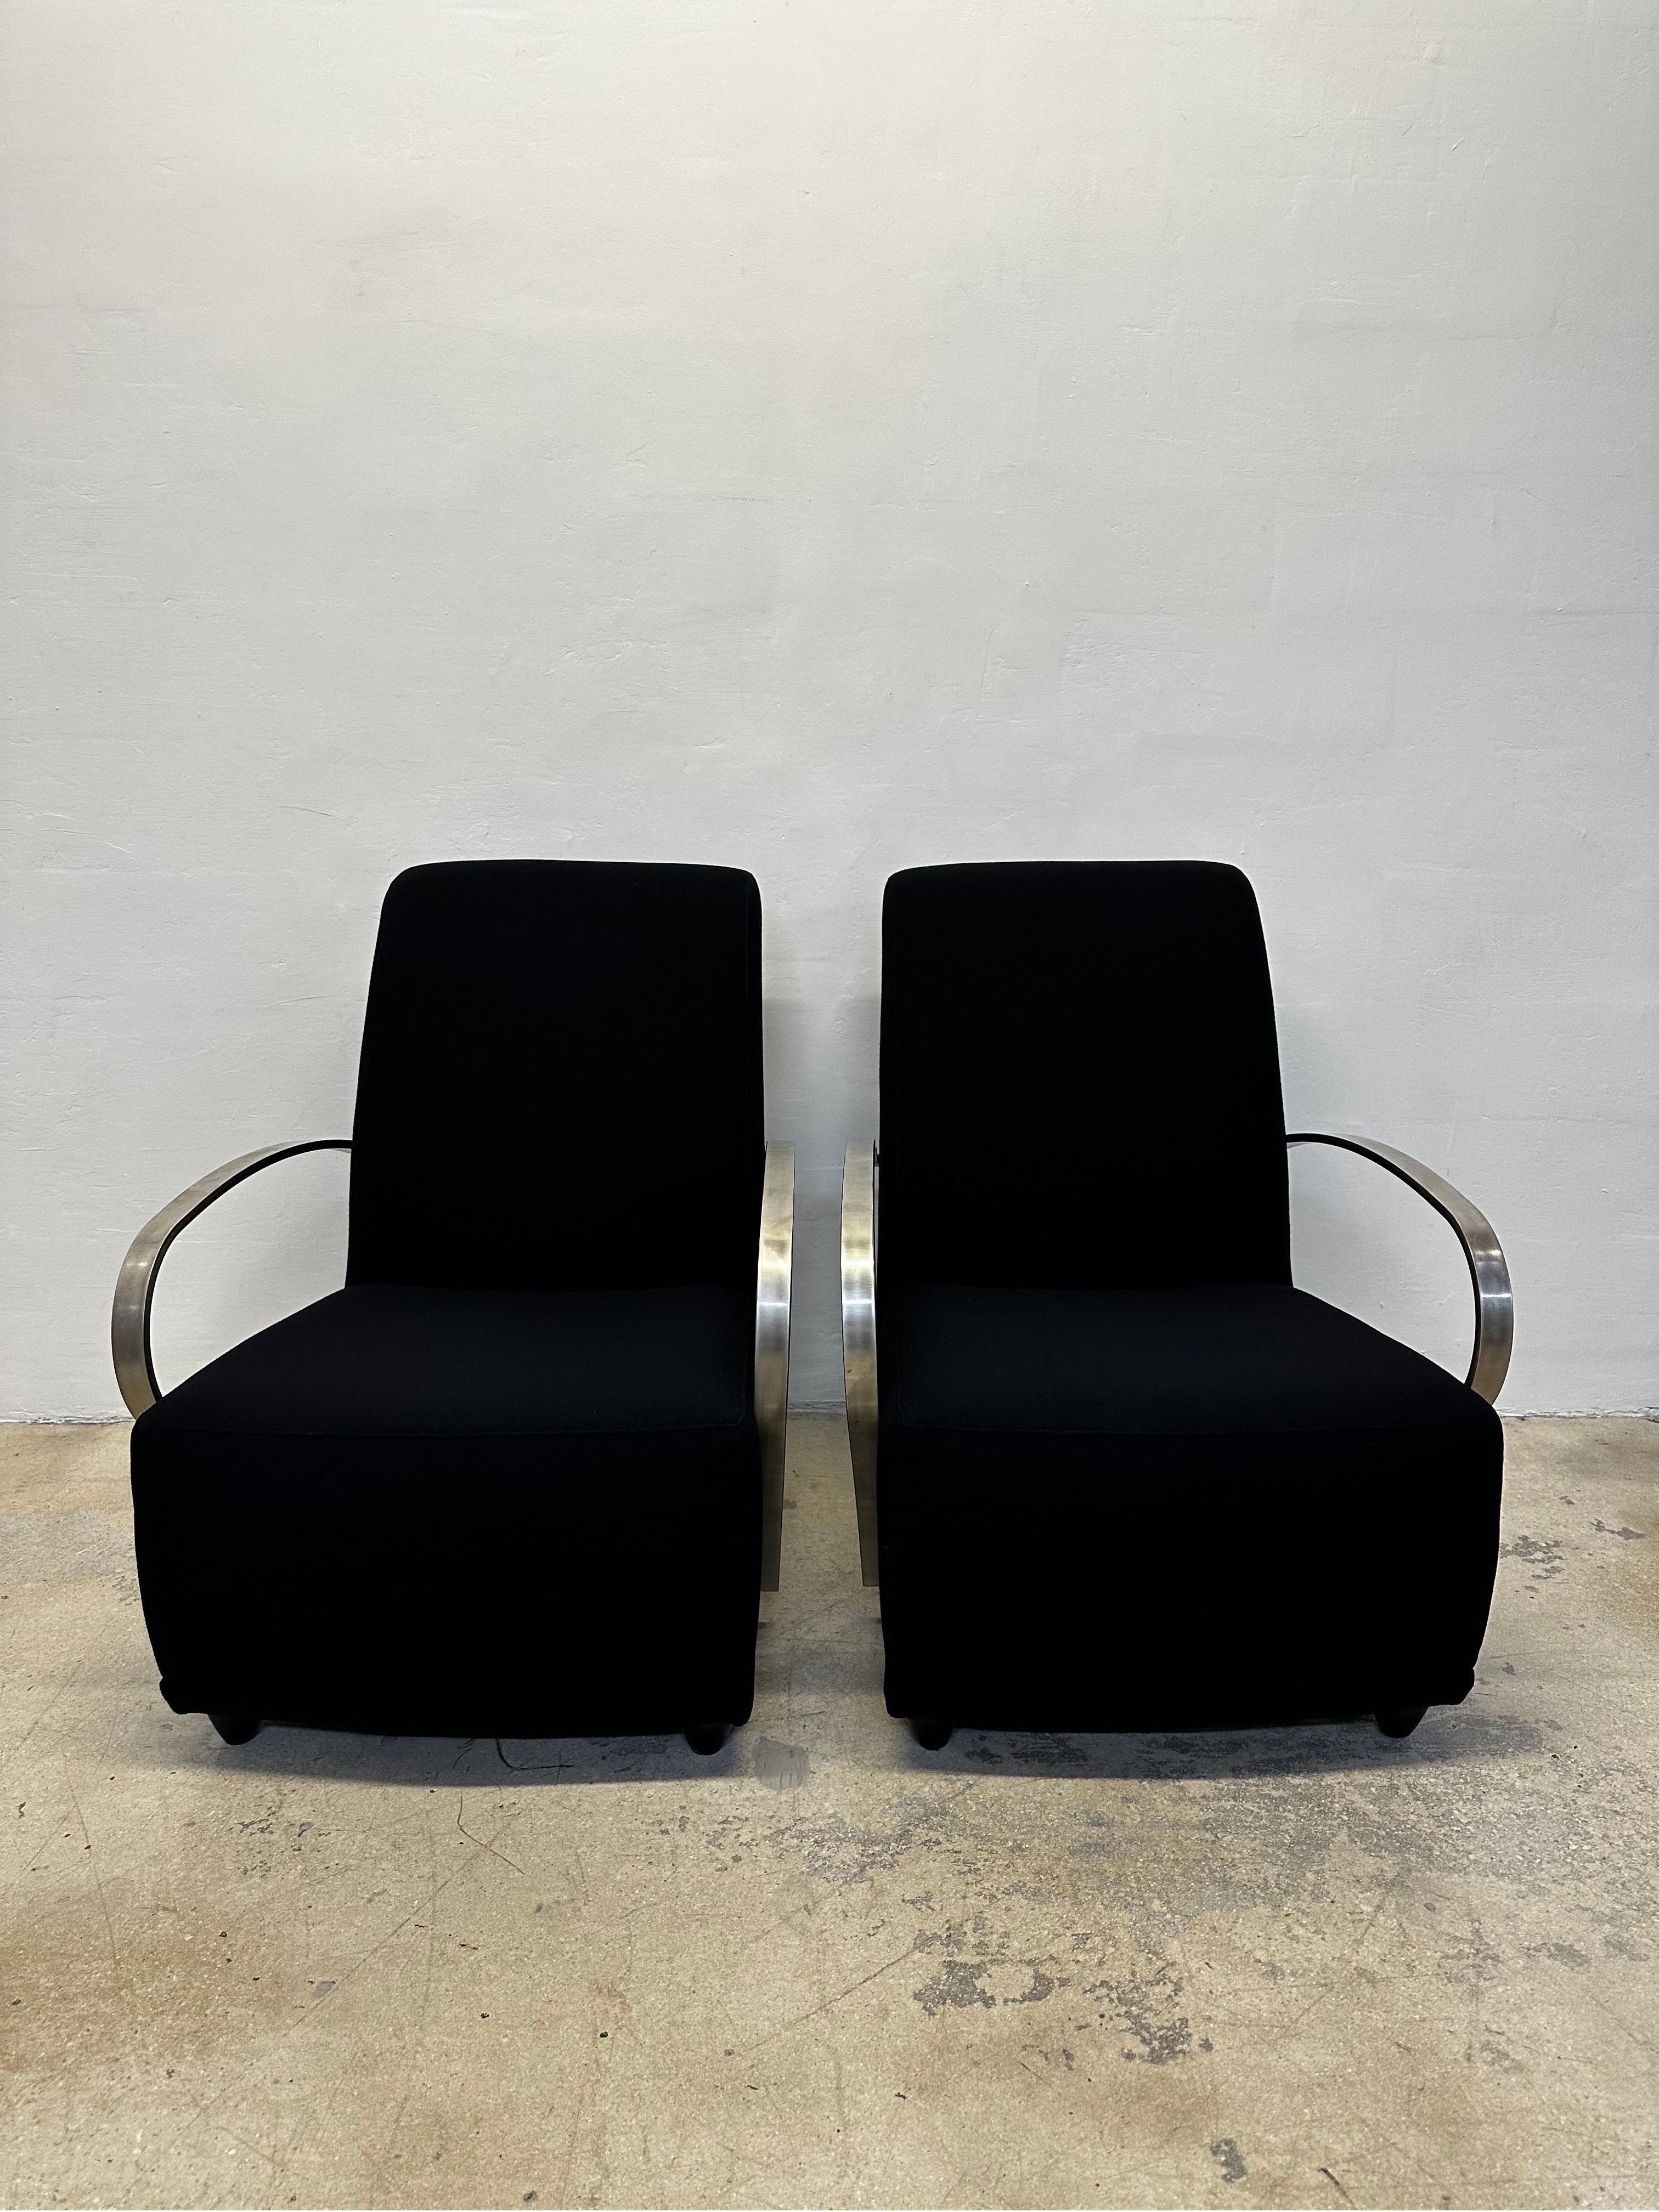 Pair of exceptional Art Deco Revival black fabric lounge chairs with curved steel arms by Directional Furniture circa 1980s.  The fabric is original and in near perfect condition.